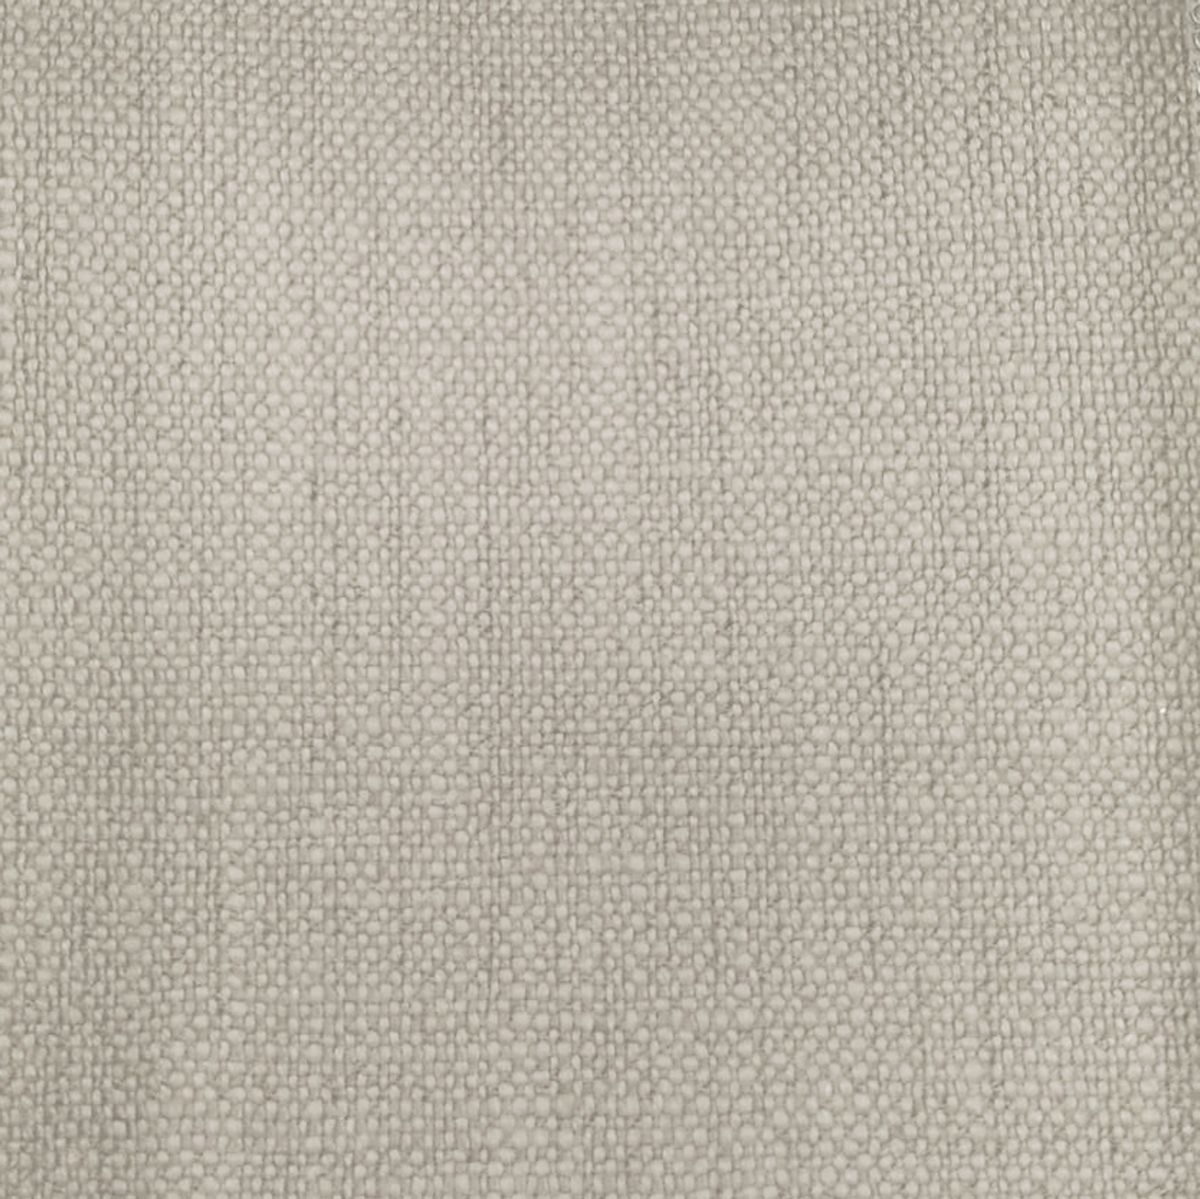 Trento Linen Fabric by Voyage Maison